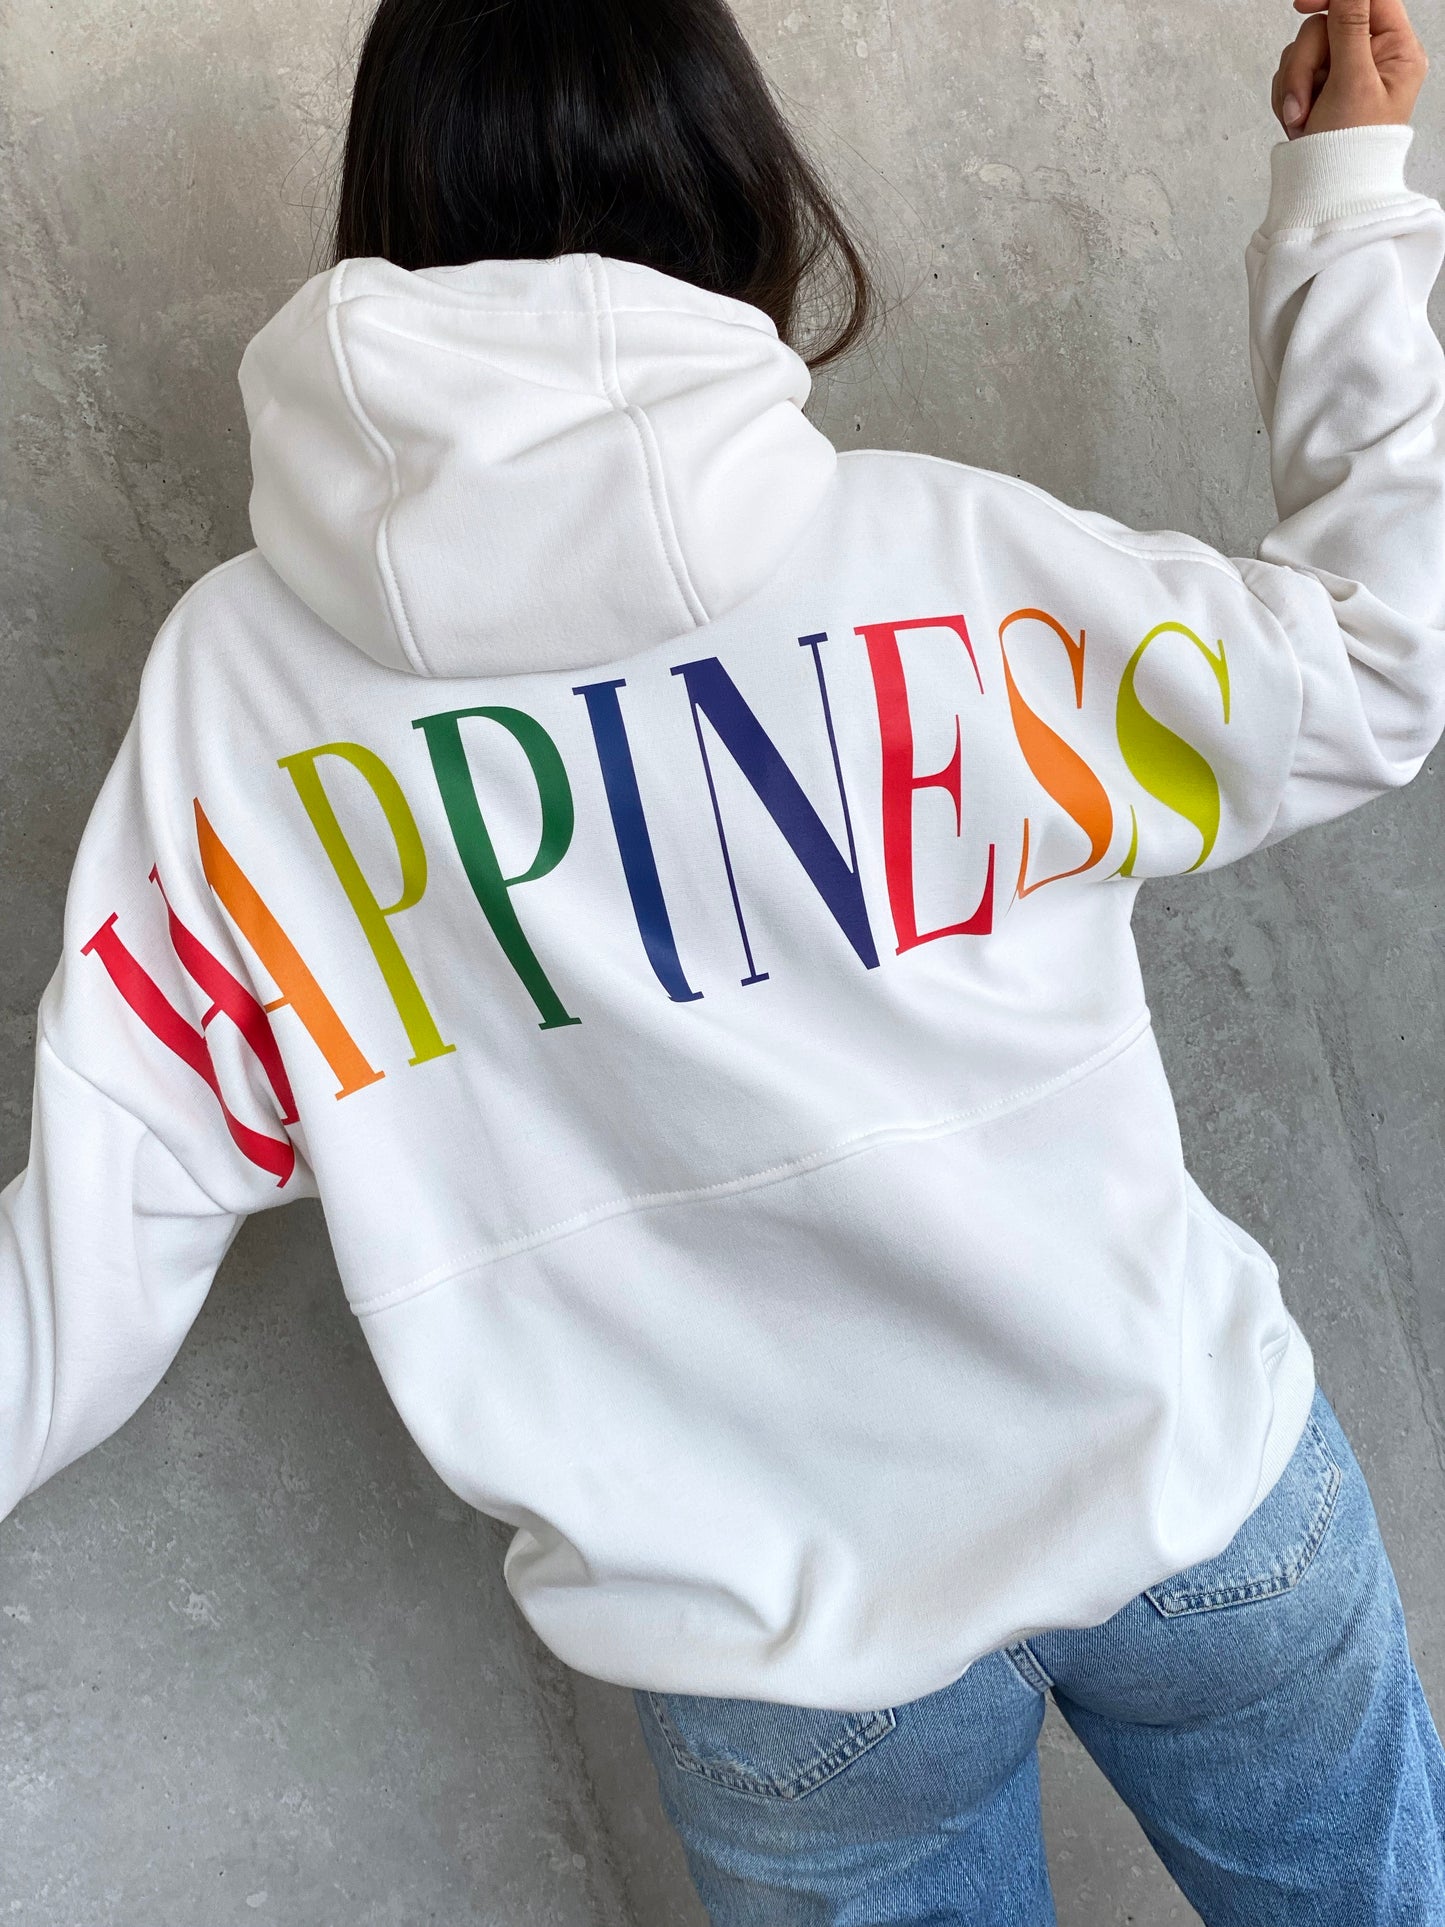 Perfecto Imperfecto Hoodie Happiness #139 Talla S/M